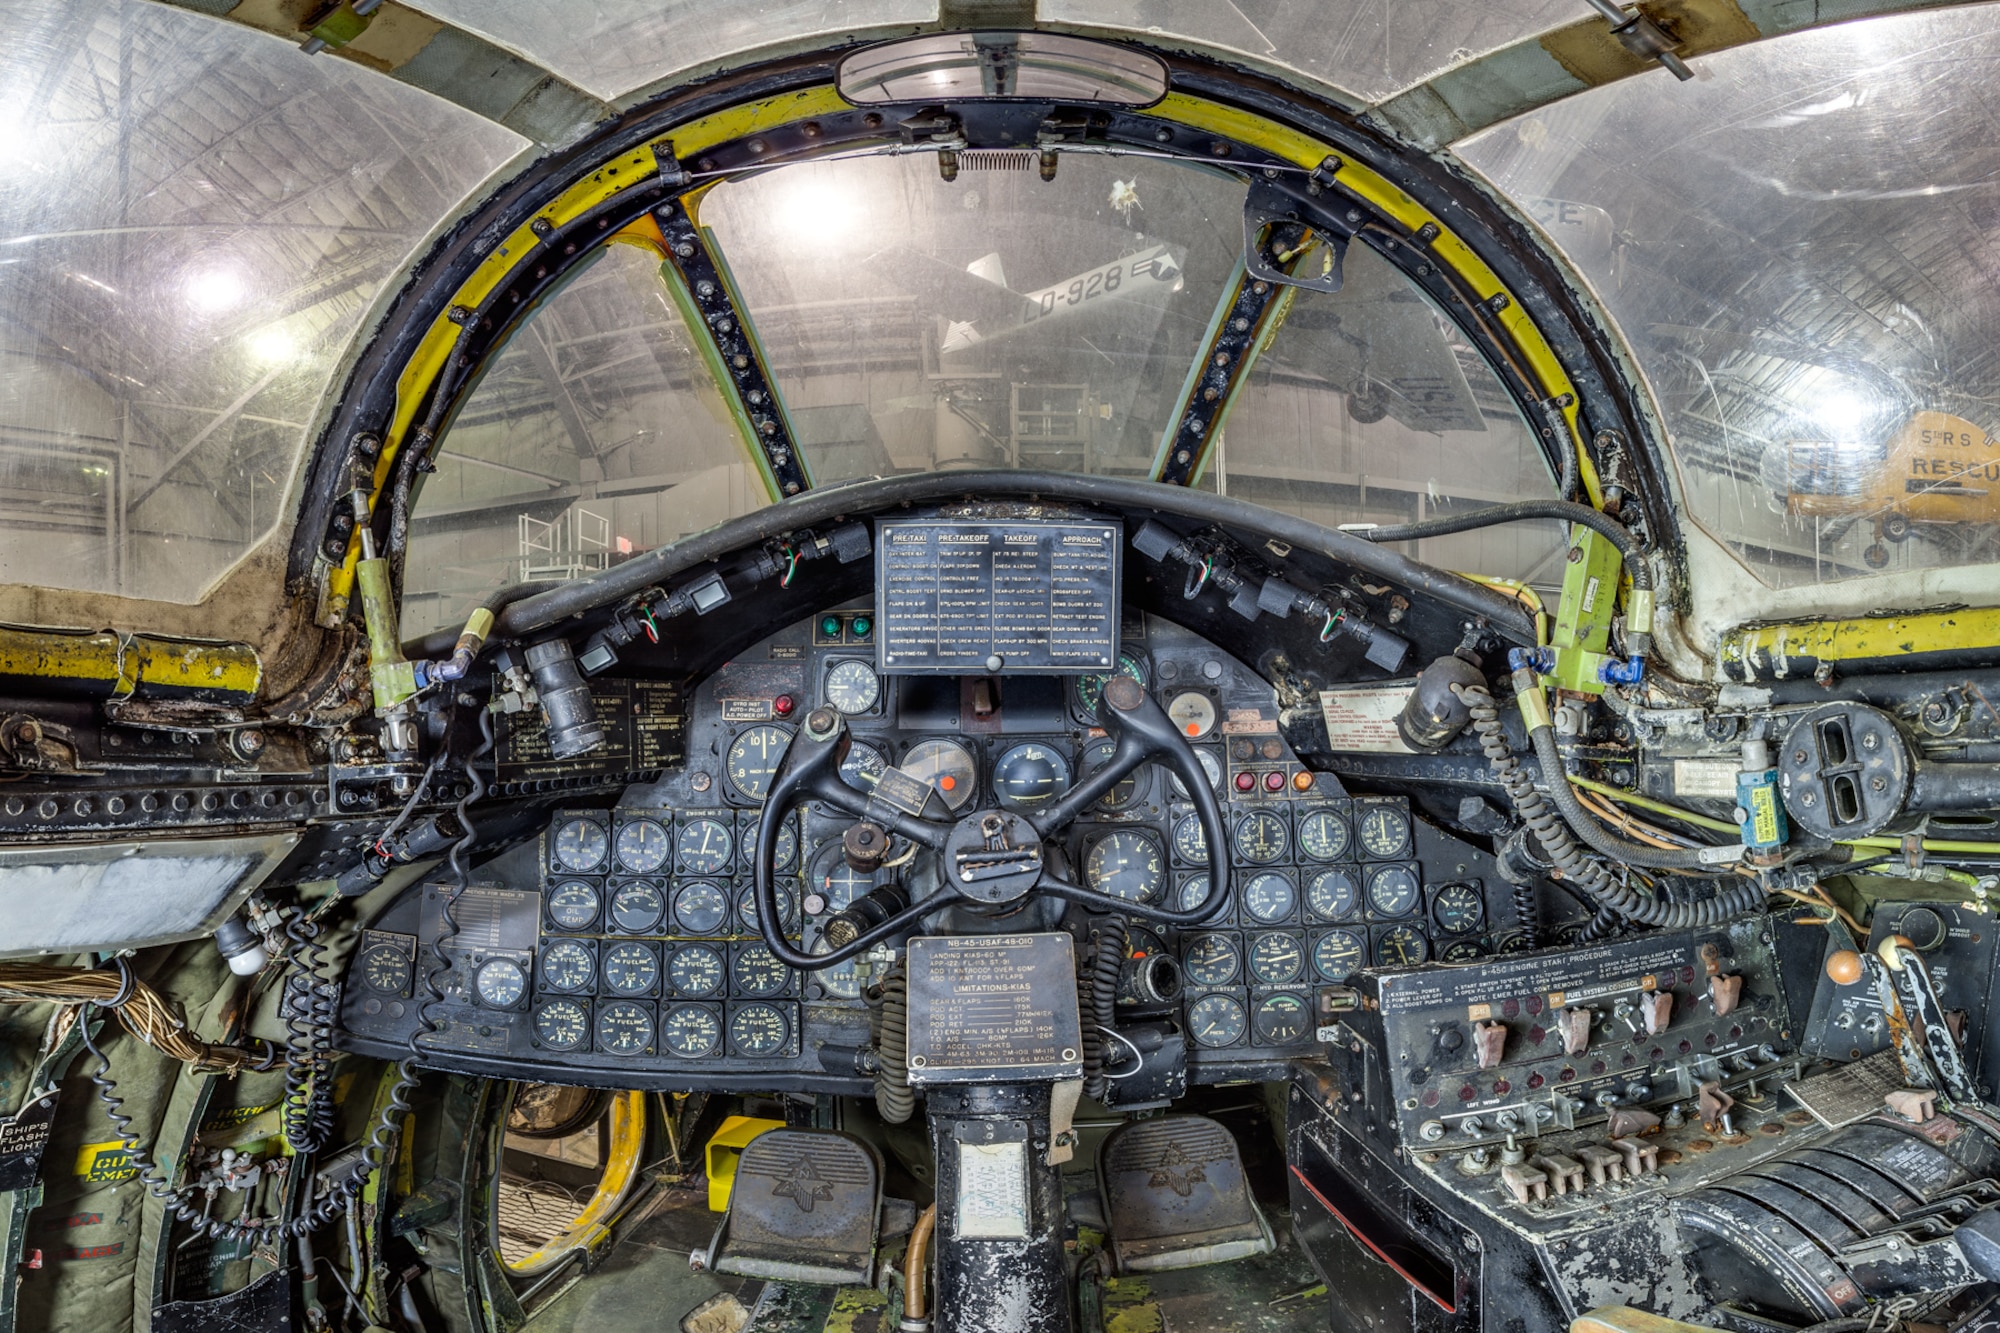 DAYTON, Ohio -- North American B-45C Tornado pilot cockpit view in the Korean War Gallery at the National Museum of the United States Air Force.(Photo courtesy of Lyle Jansma, Aerocapture Images)  